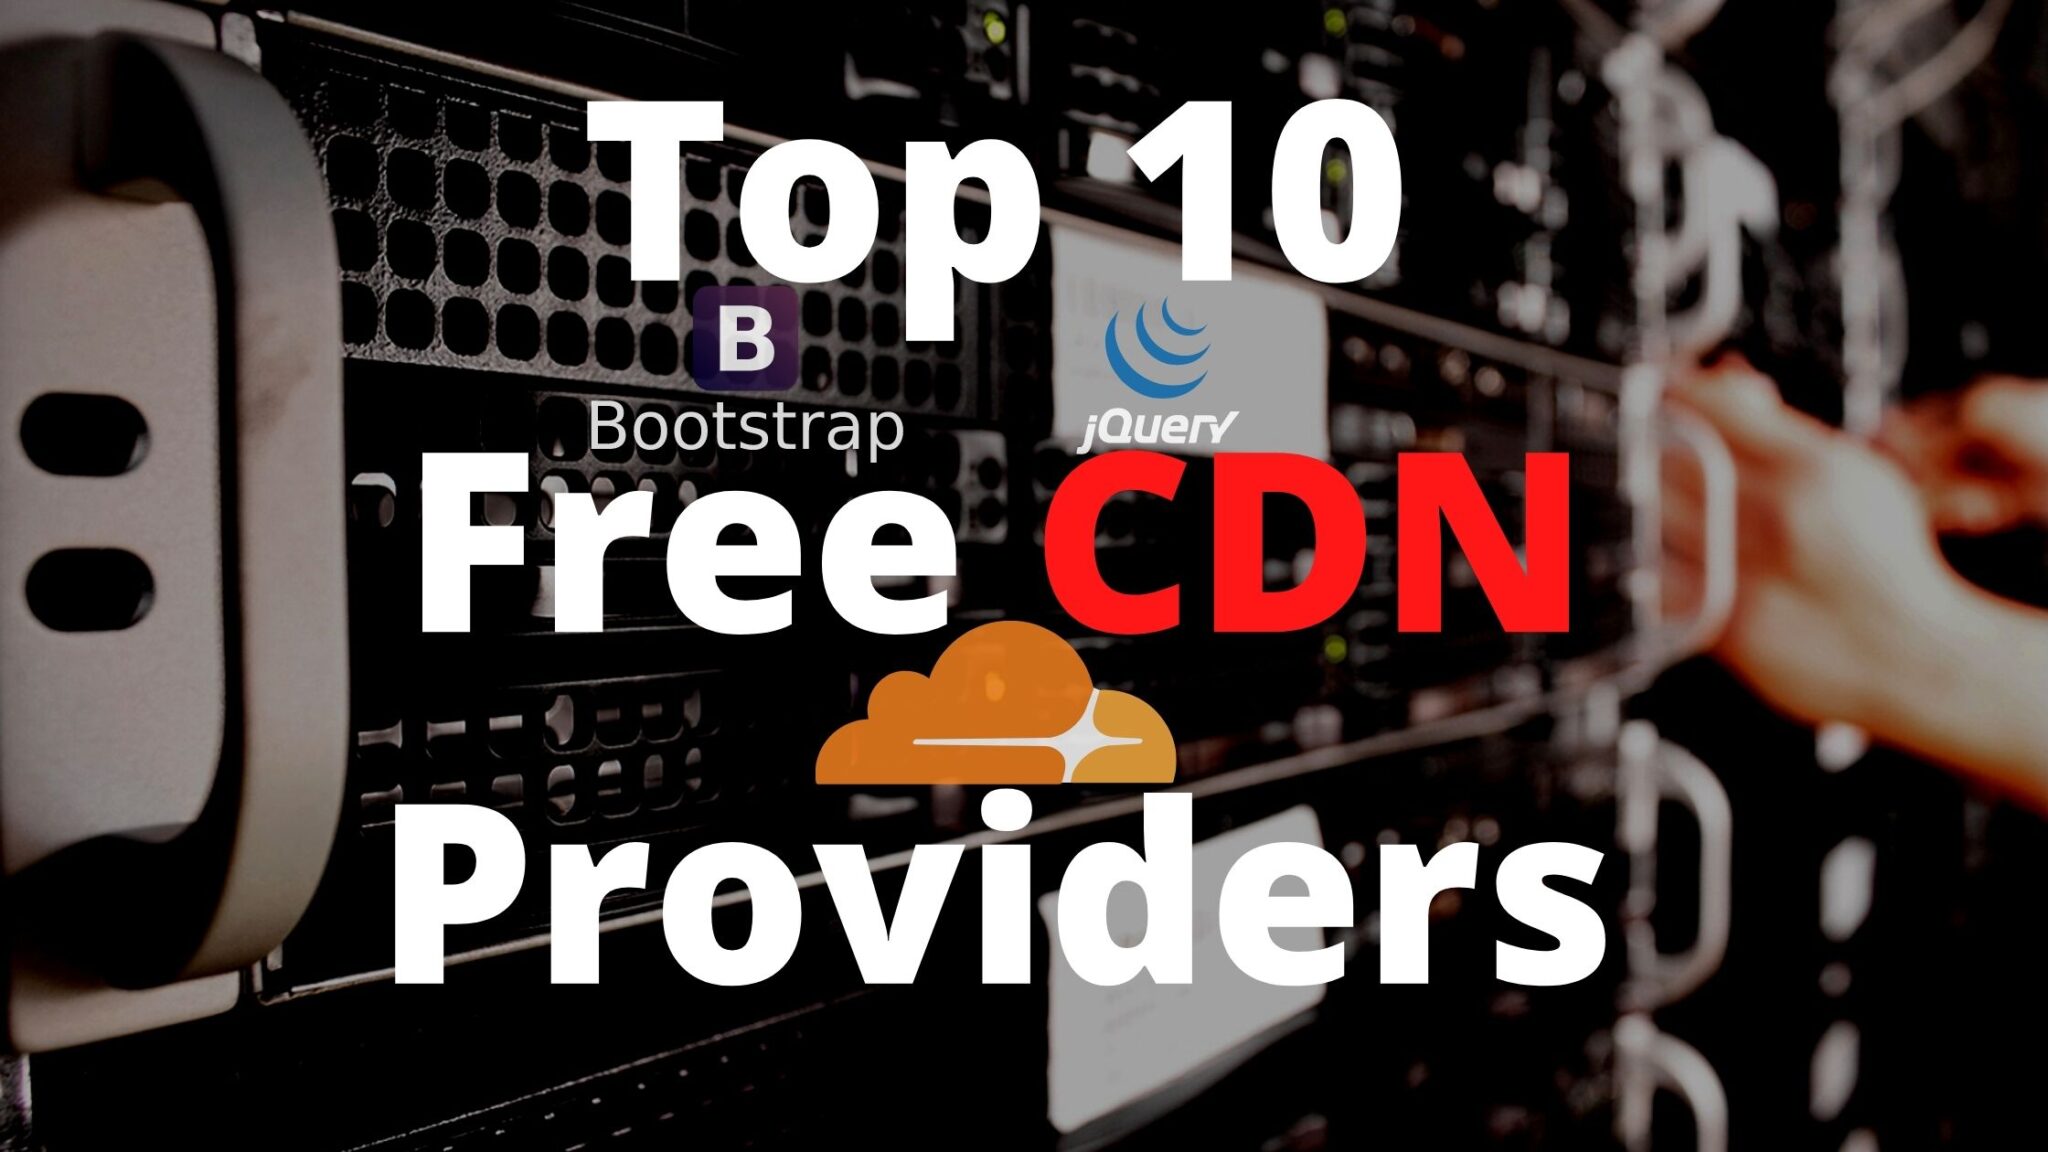 Top 10 Free CDN Providers to Speed Your Website